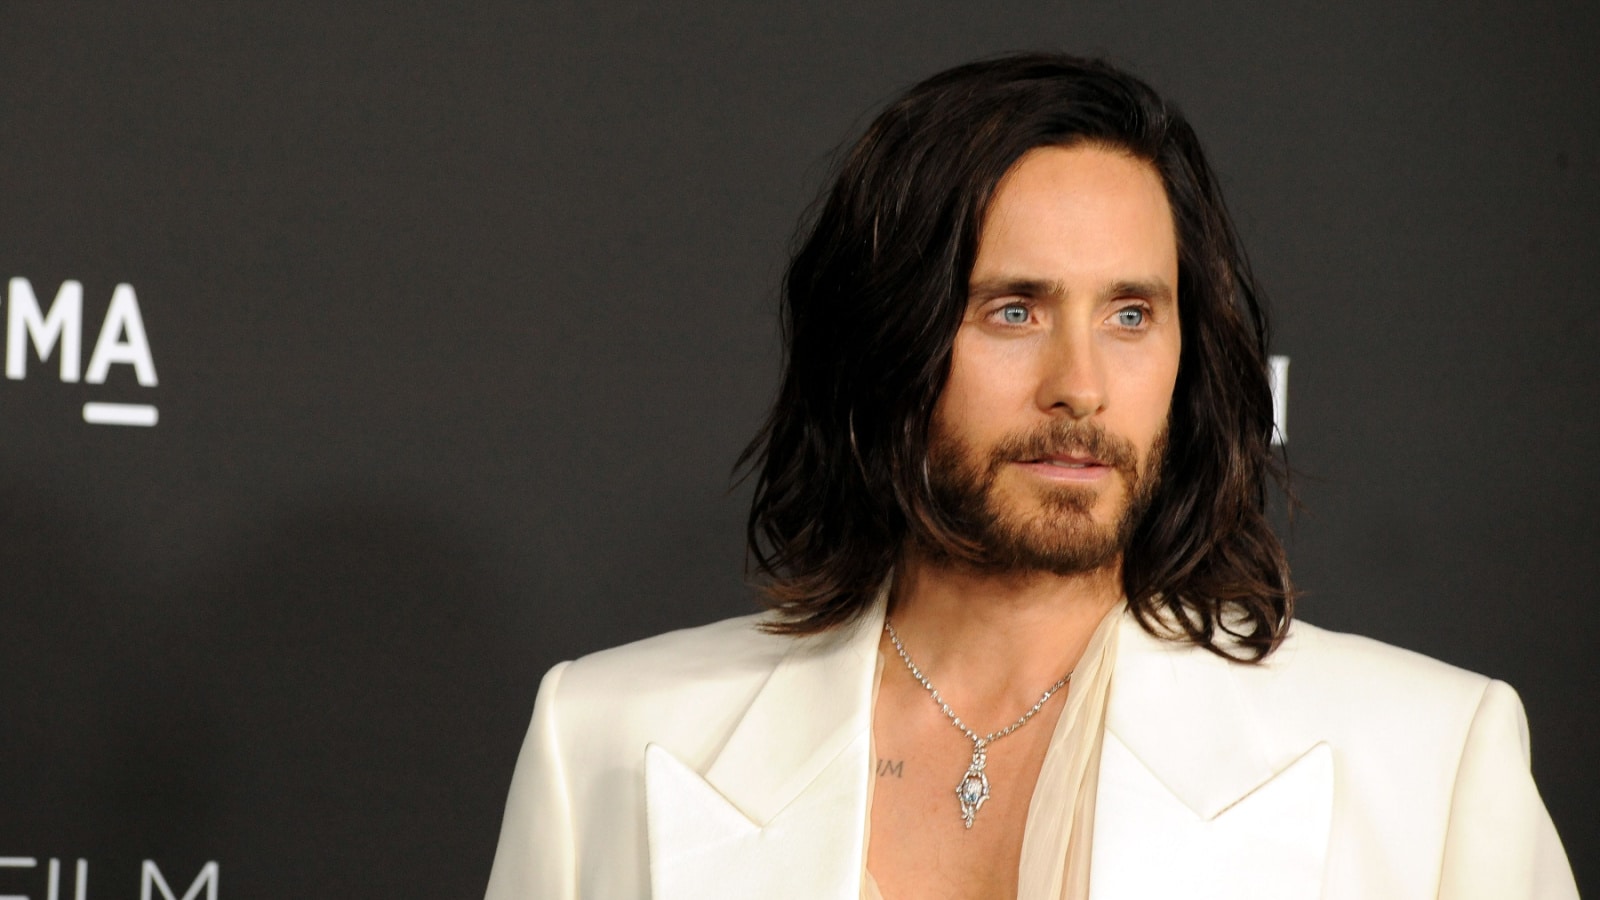 Jared Leto at the 10th Annual LACMA ART+FILM GALA Presented By Gucci held at the LACMA in Los Angeles, USA on November 6, 2021.